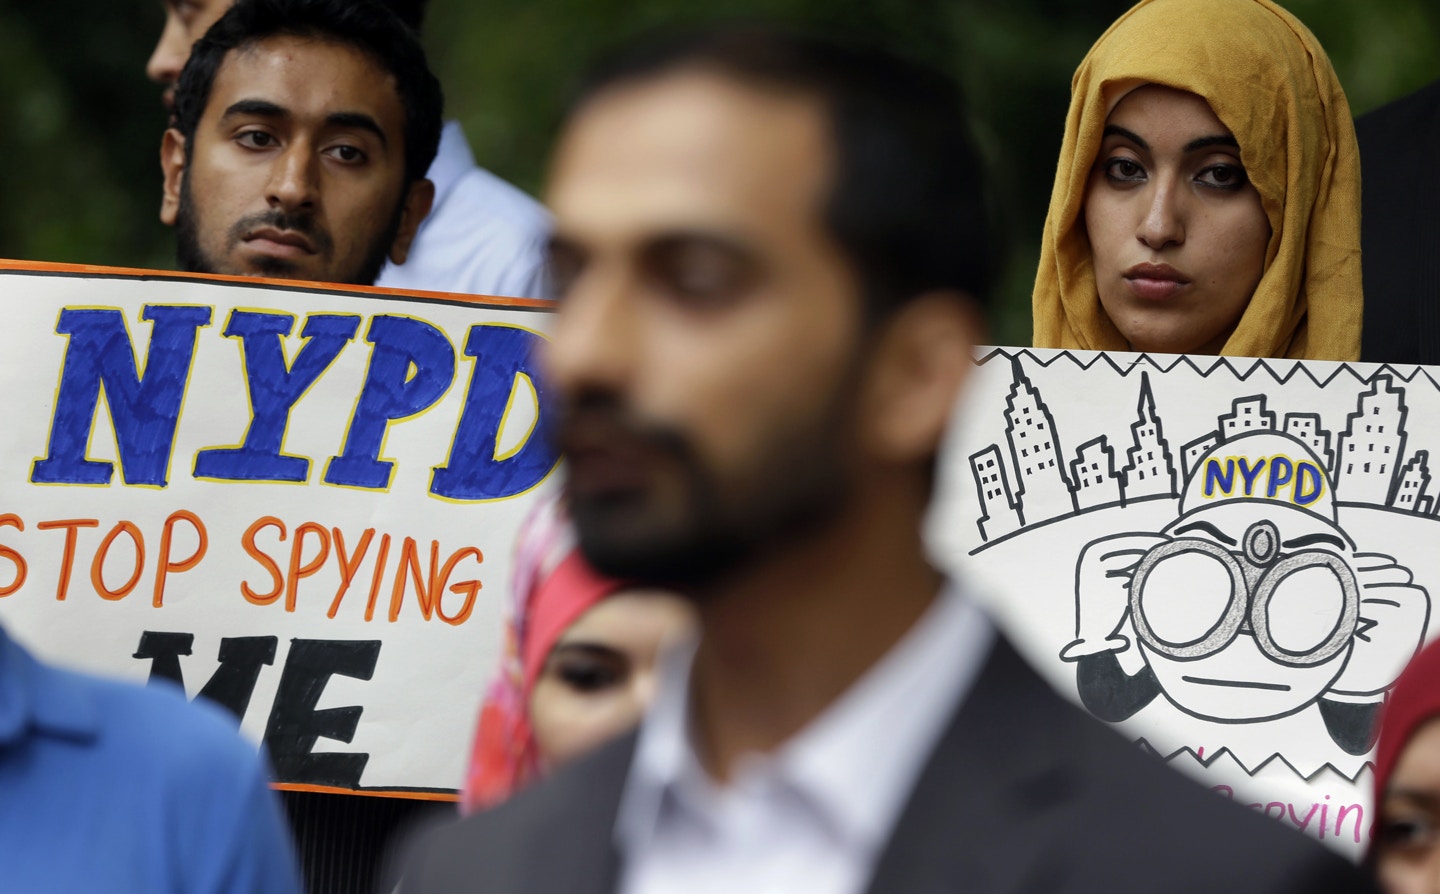 People hold signs while attending a rally to protest New York Police Department surveillance tactics near police headquarters in New York, Wednesday, Aug. 28, 2013. The New York Police Department has secretly labeled entire mosques as terrorist organizations, a designation that allows police to use informants to record sermons and spy on imams, often without specific evidence of criminal wrongdoing. (AP Photo/Seth Wenig)